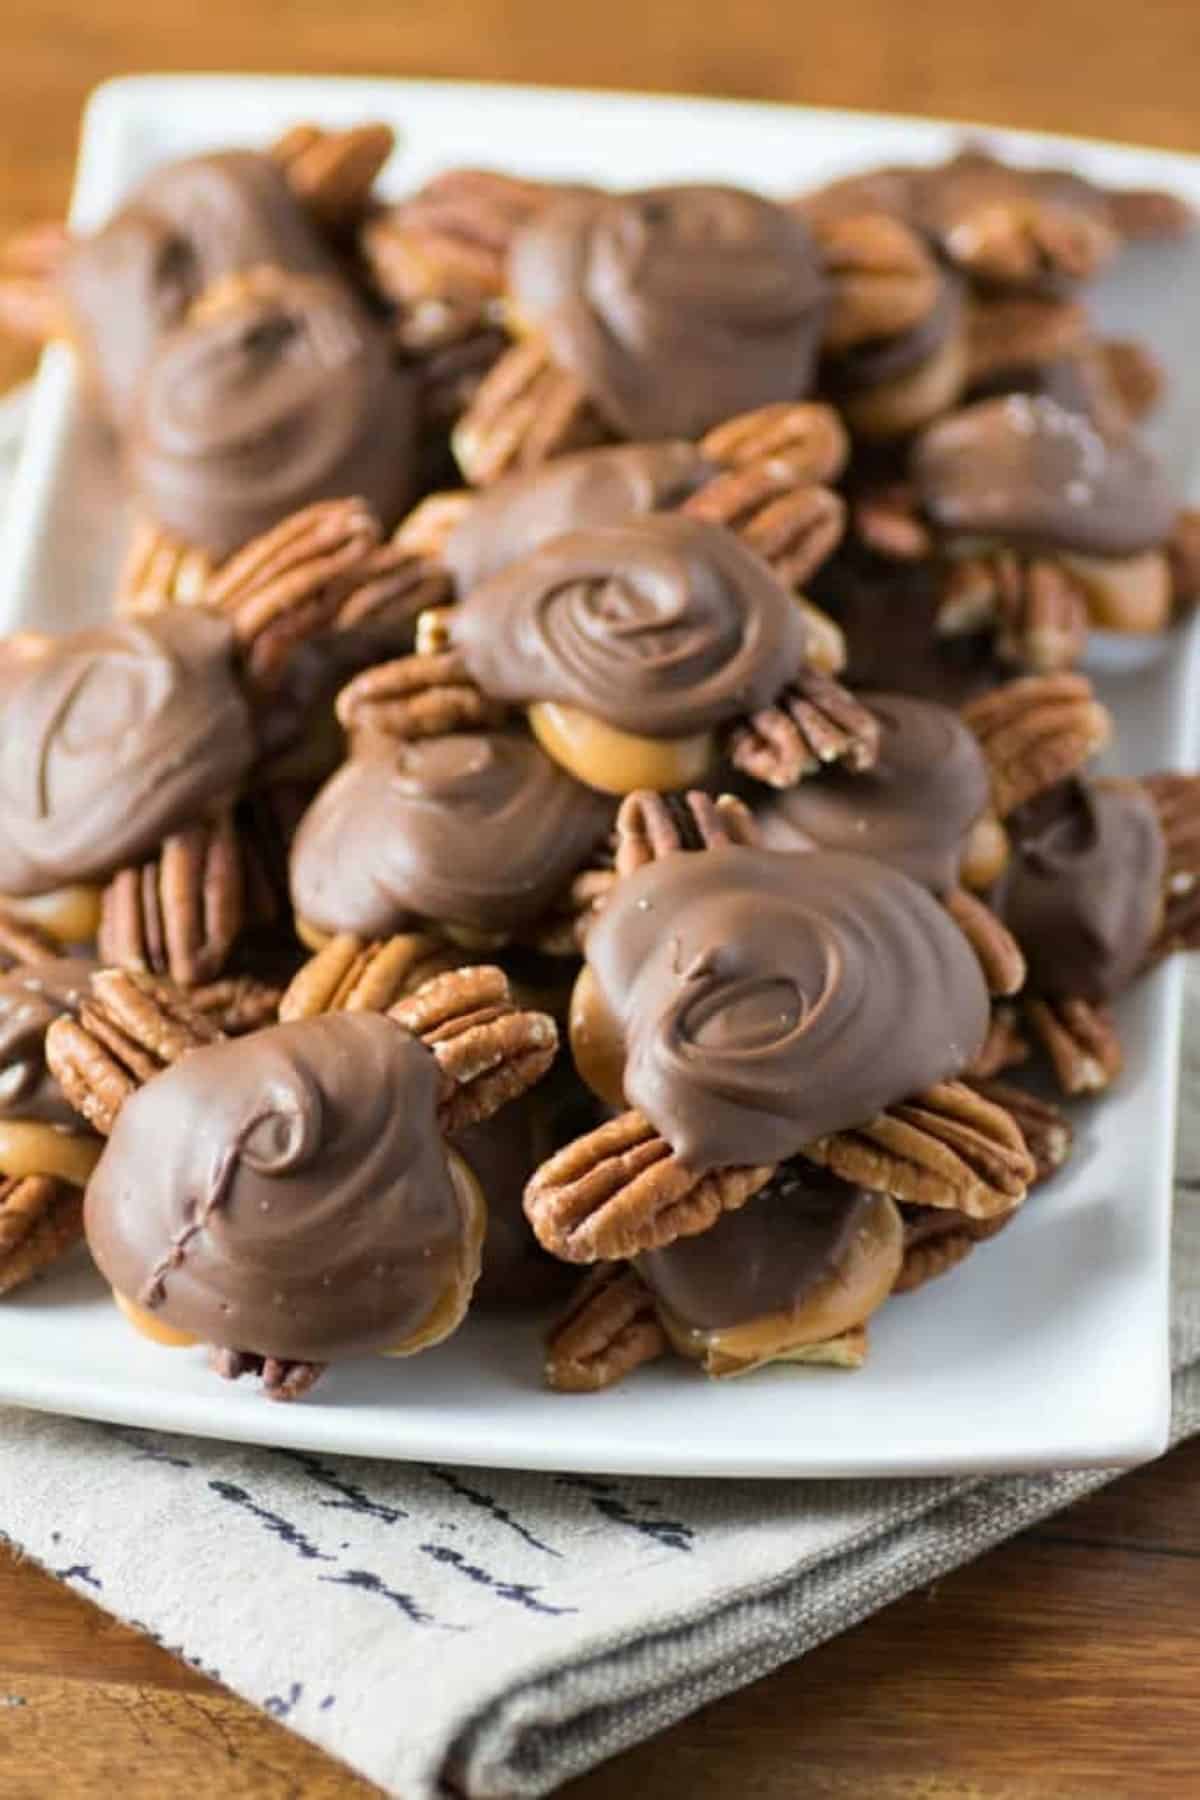 Homemade Chocolate Turtles stacked on a white plate.